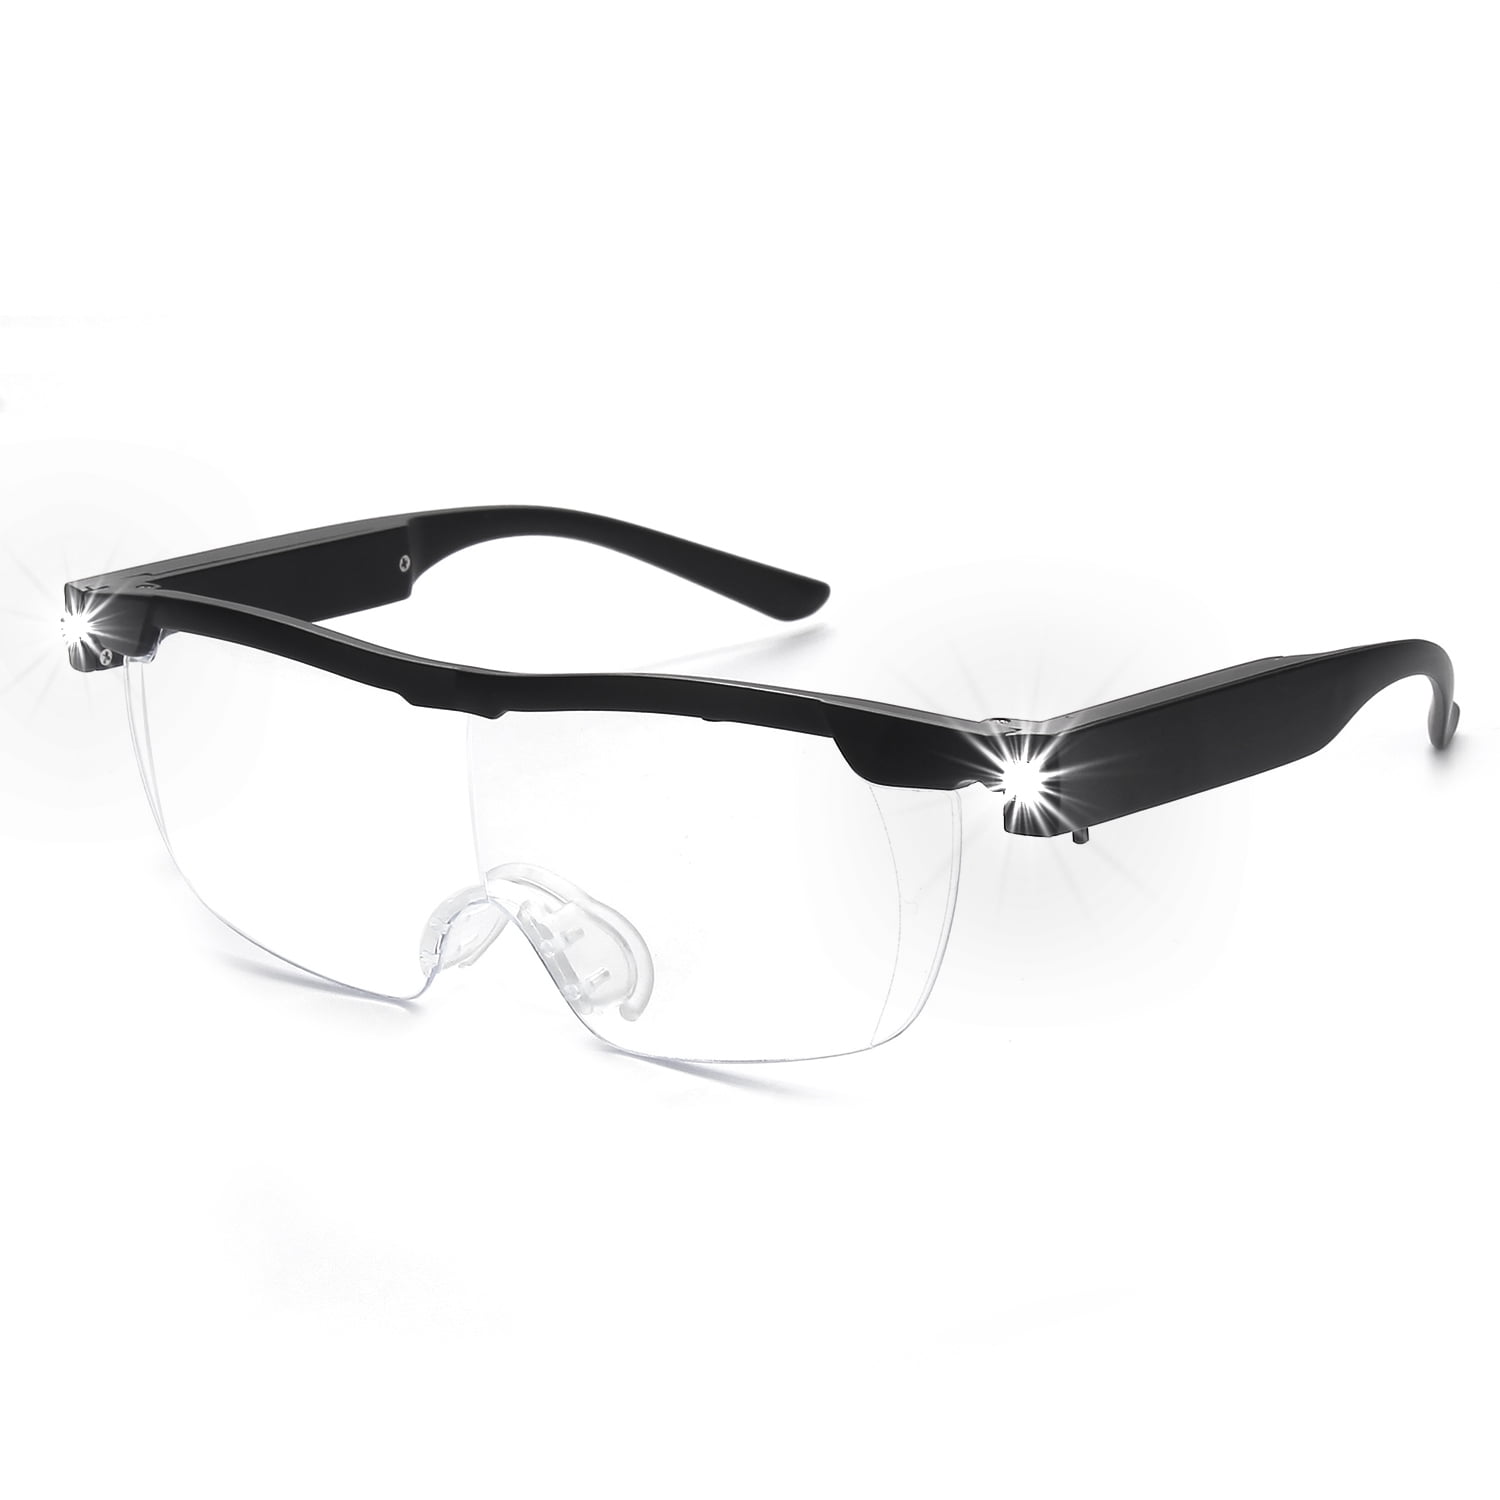  Eyeoomu Reading Glasses Clip On Magnifiers For